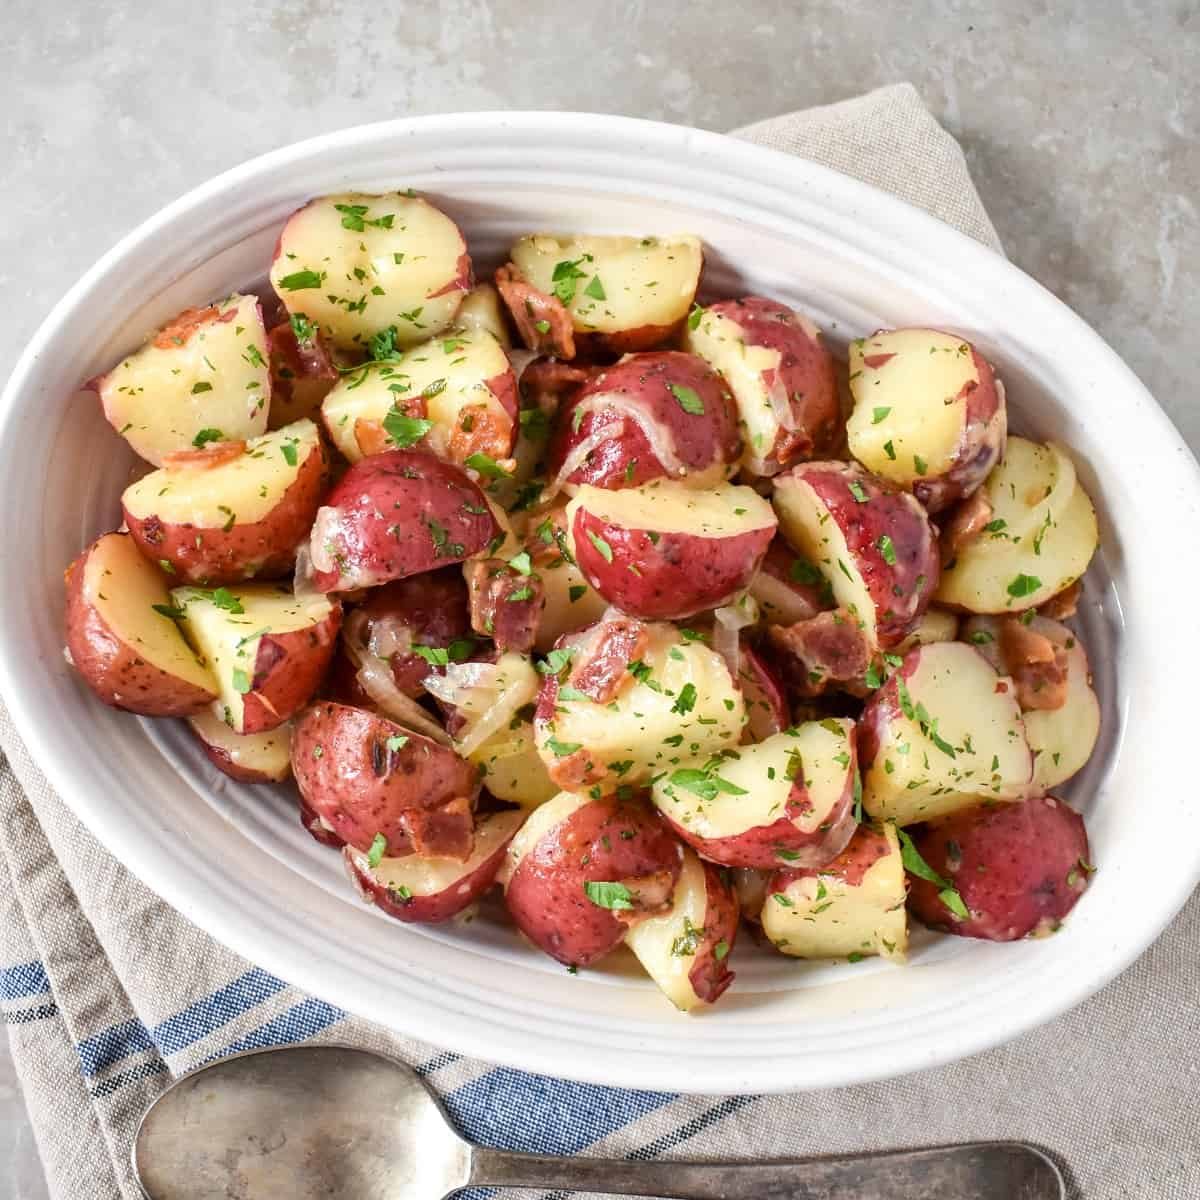 The warm potato salad served in an oval, white bowl with a large serving spoon on the side.